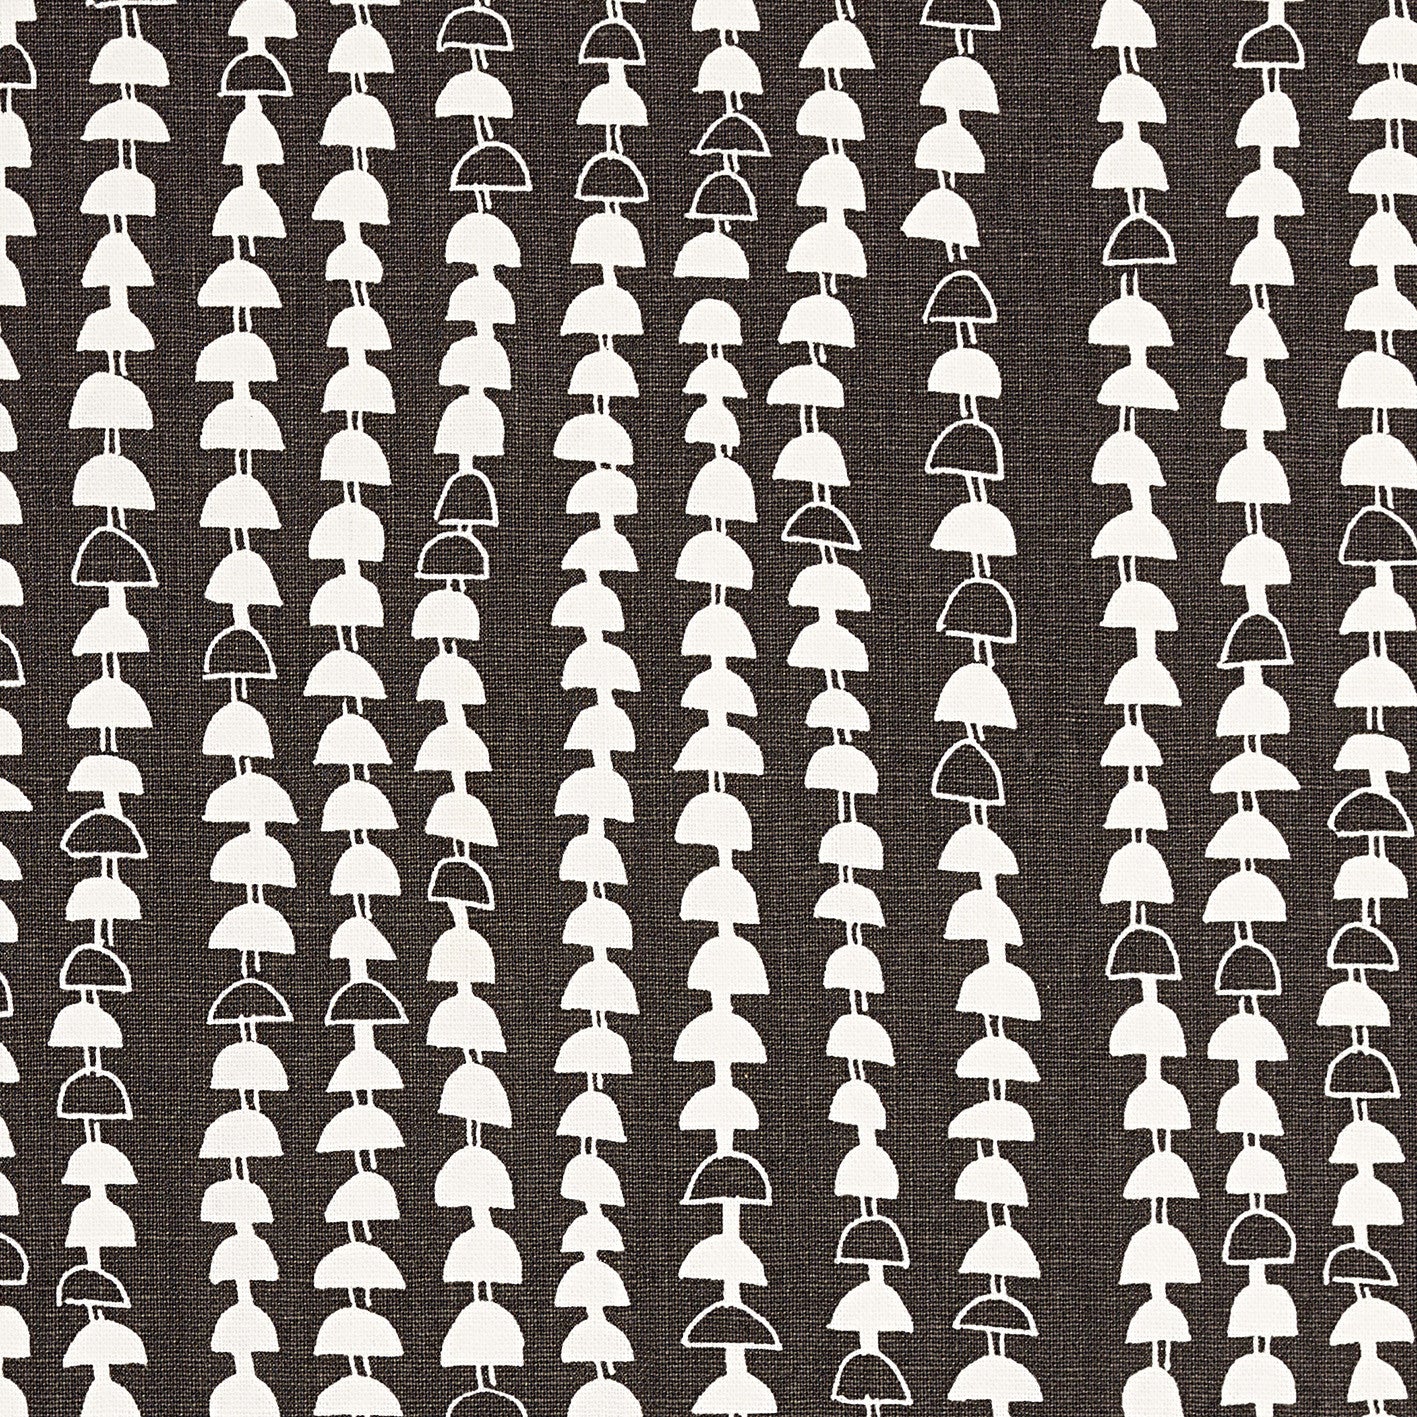 Hopi Graphic Strung Bead Pattern Linen Cotton Designer Home Decor Fabric for curtains, blinds, upholstery in Dark Stone Grey (Brown) ships from Canada to USA